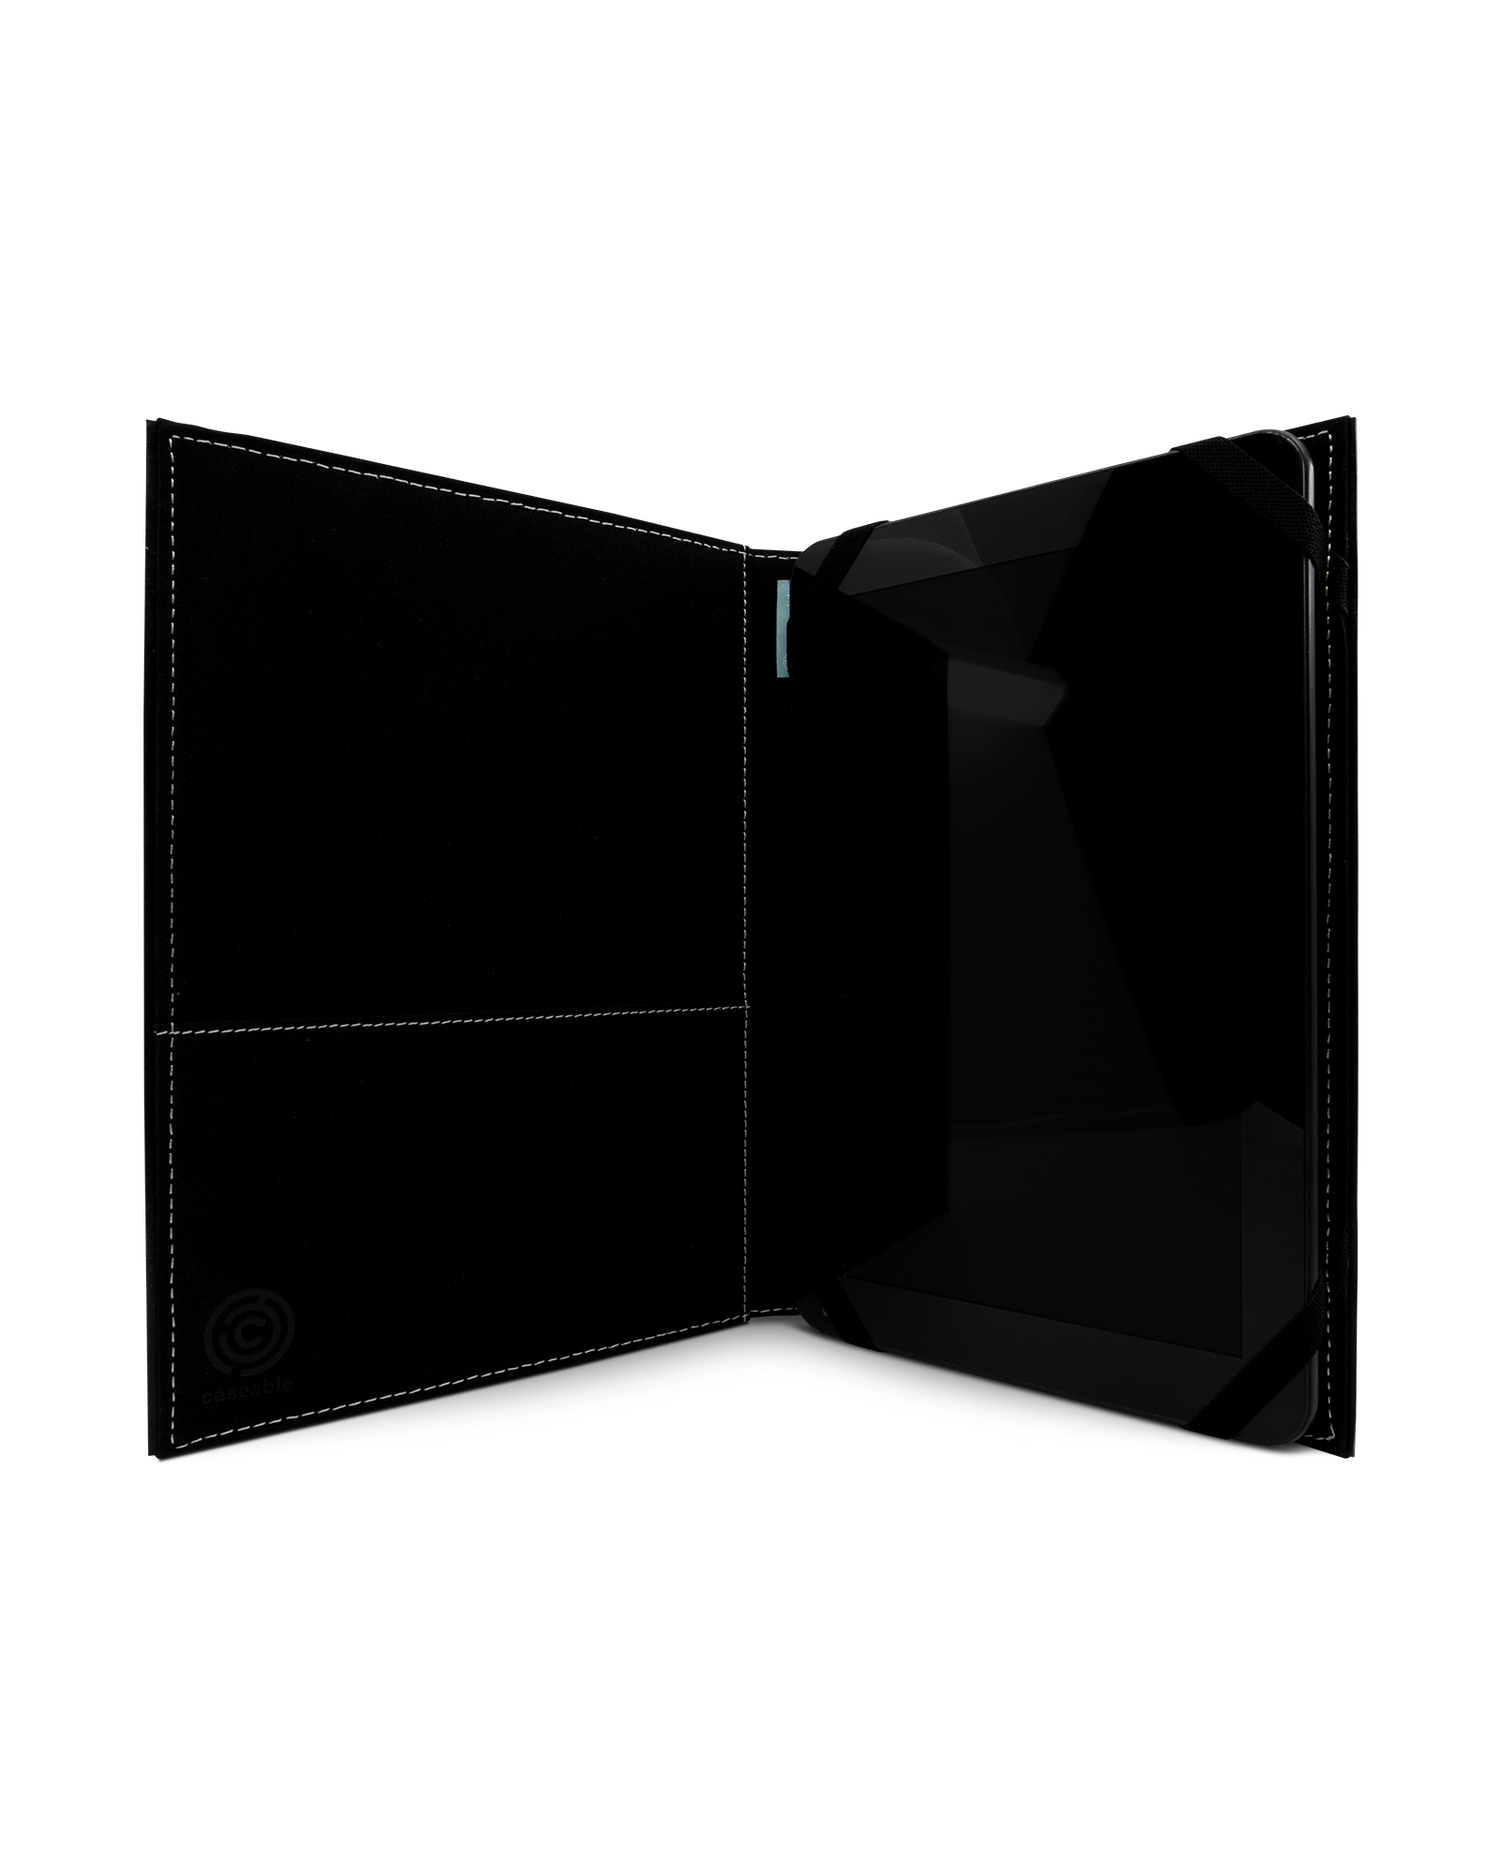 Carbon II Tablet Case M: Opened interior view